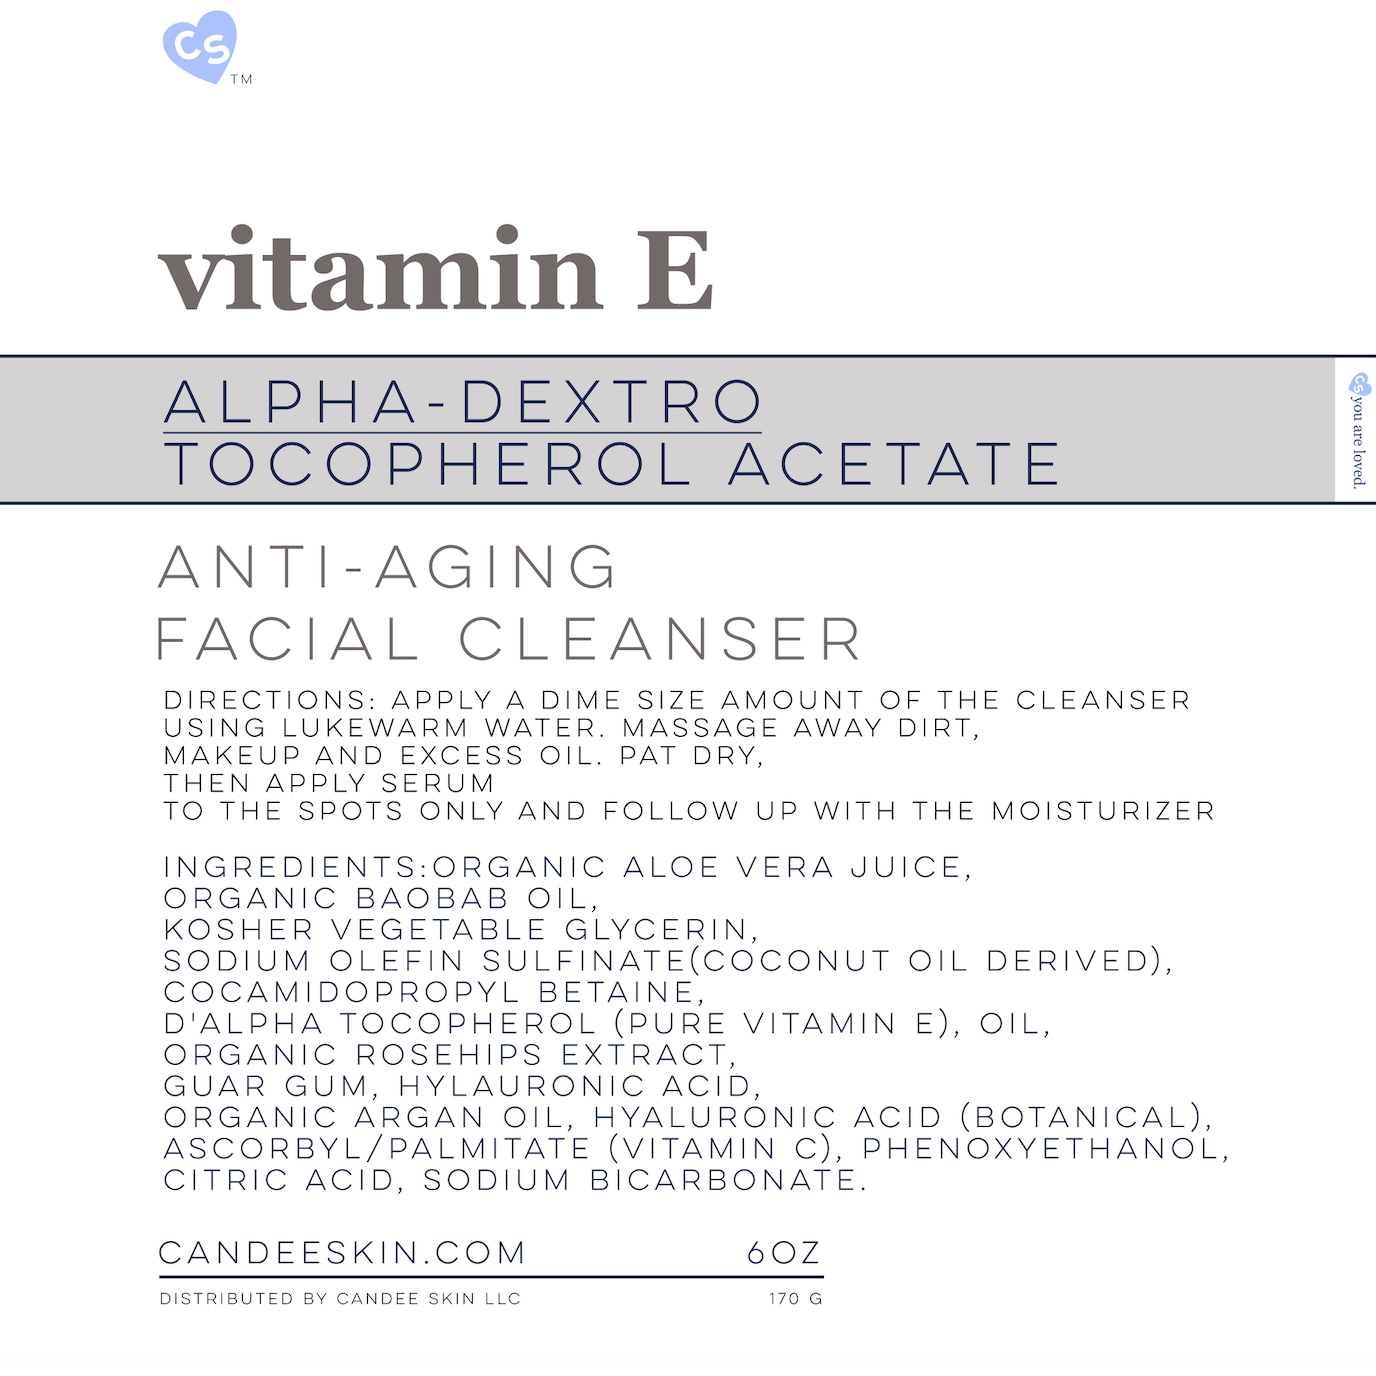 Vitamin E d'Alpha Anti-Aging Facial Cleanser. Ingredients and Directions.